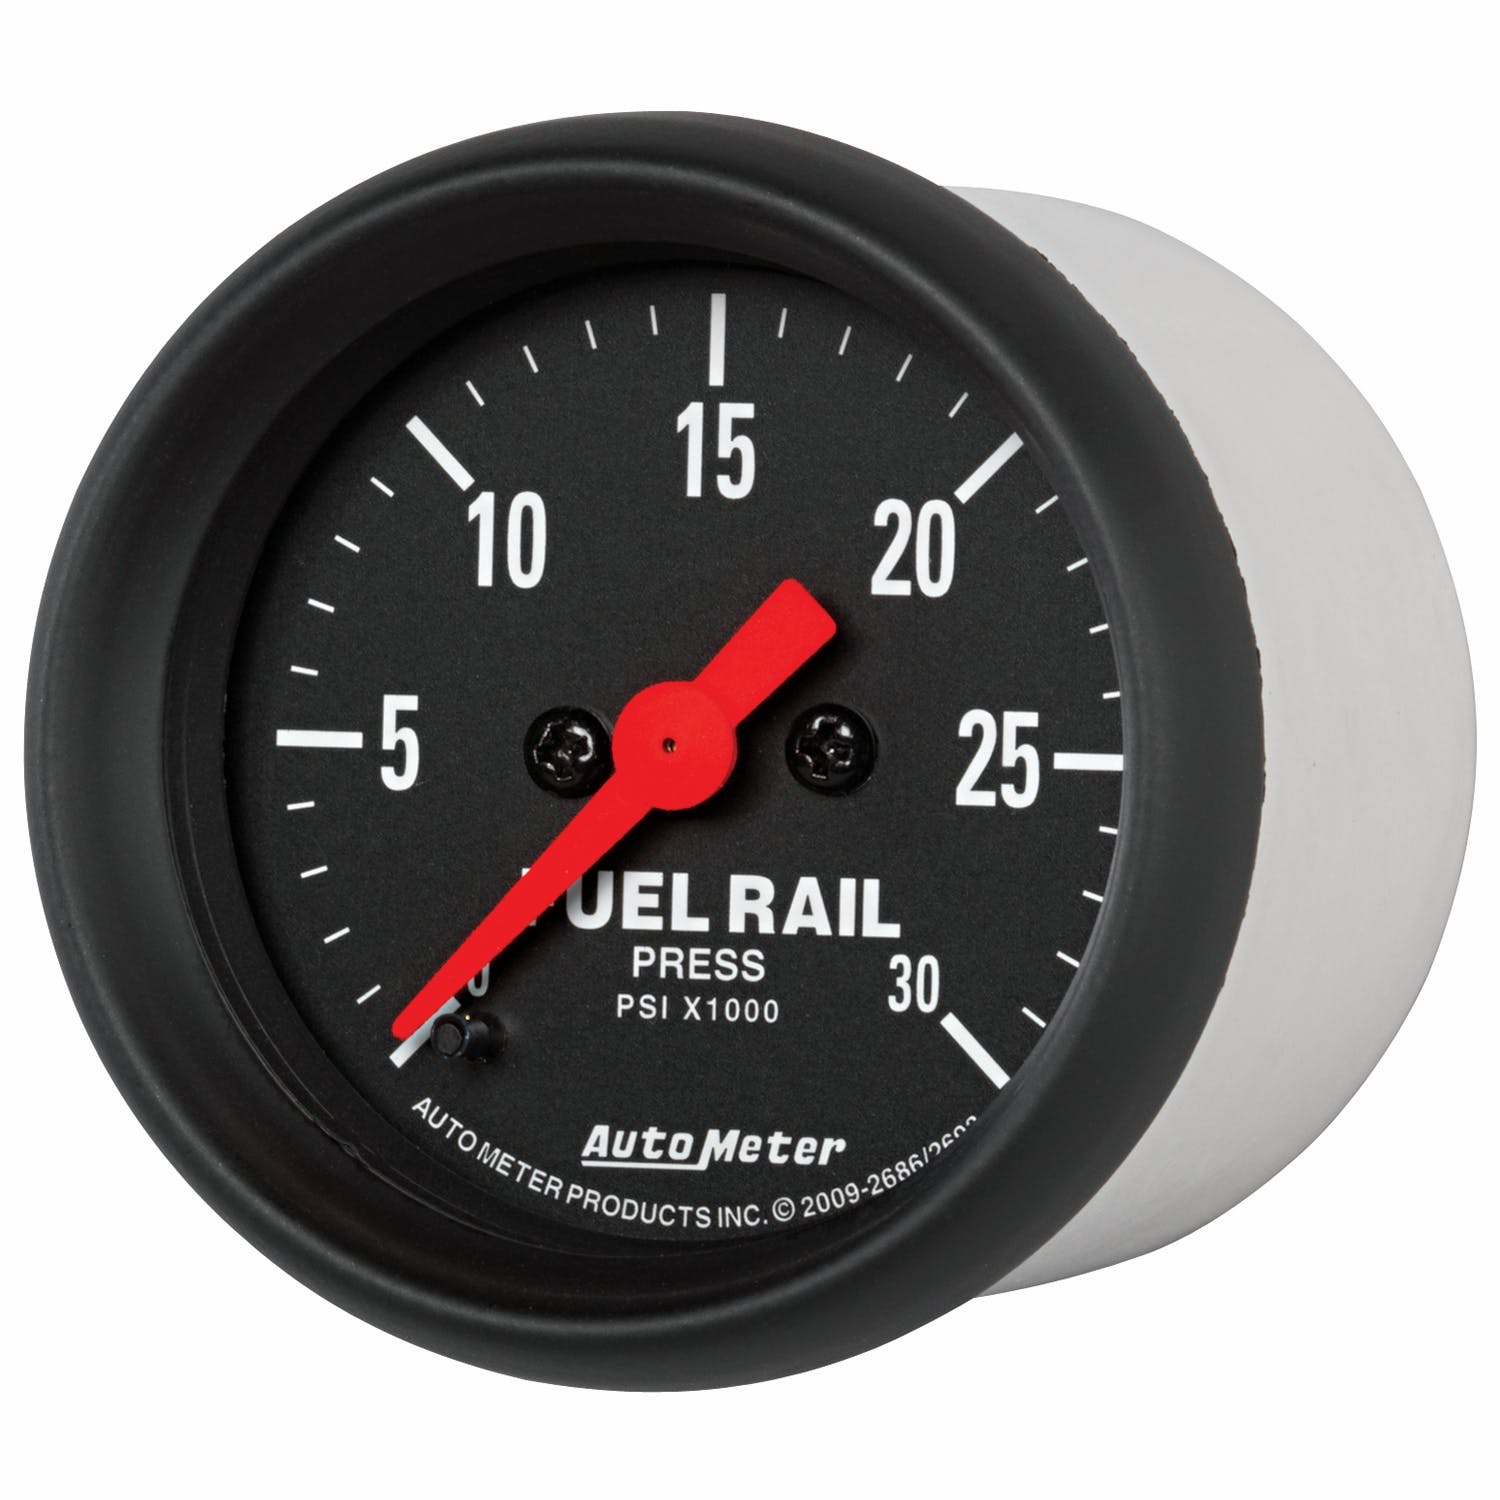 AutoMeter Products 2686 2-1/16 Fuel Rail Pressure Gauge - 0 to 30,000 psi